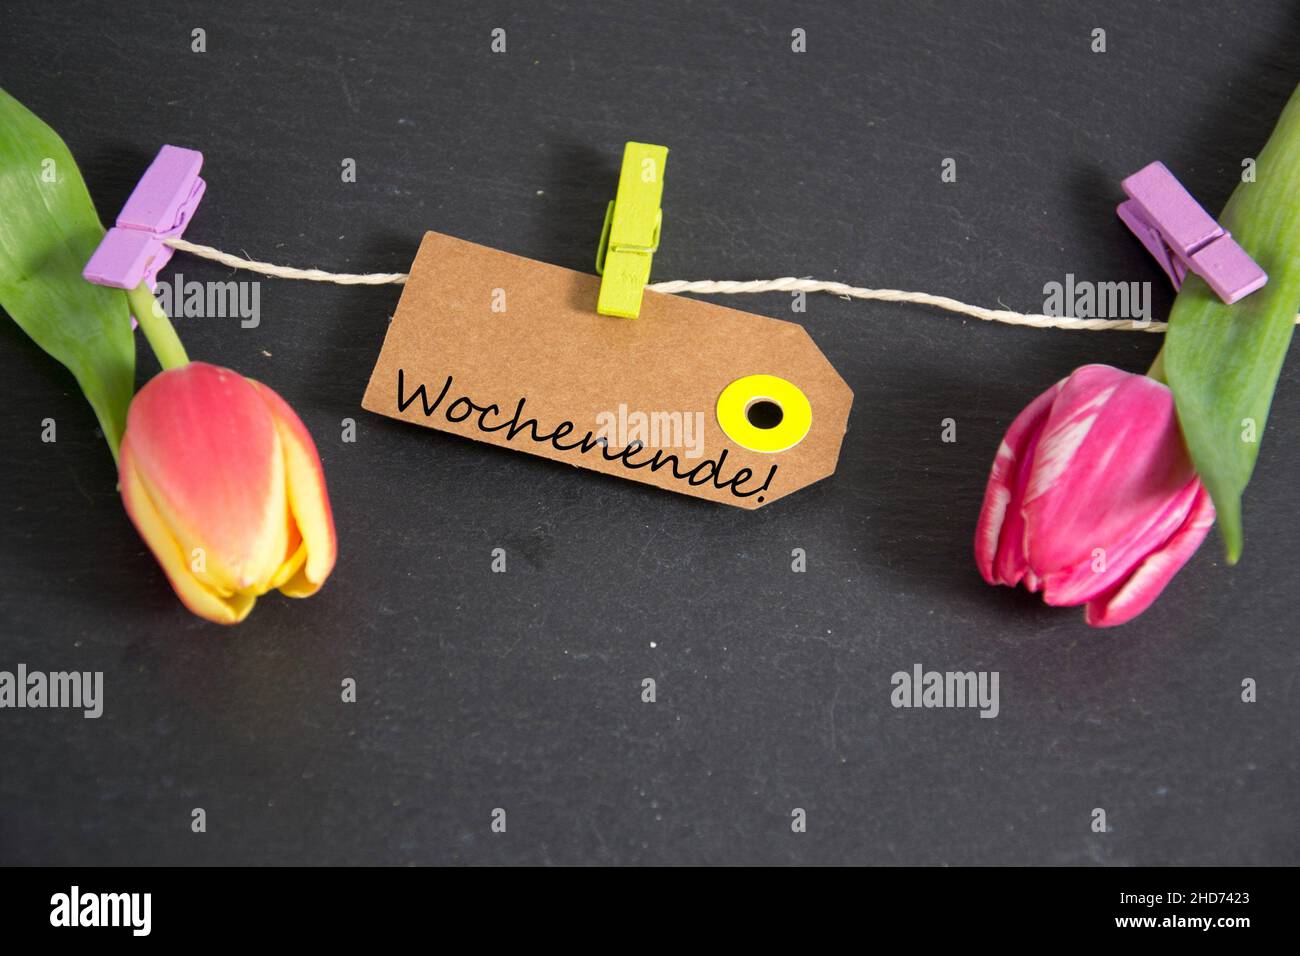 Wochenende inscription written on paper tag. Stock Photo